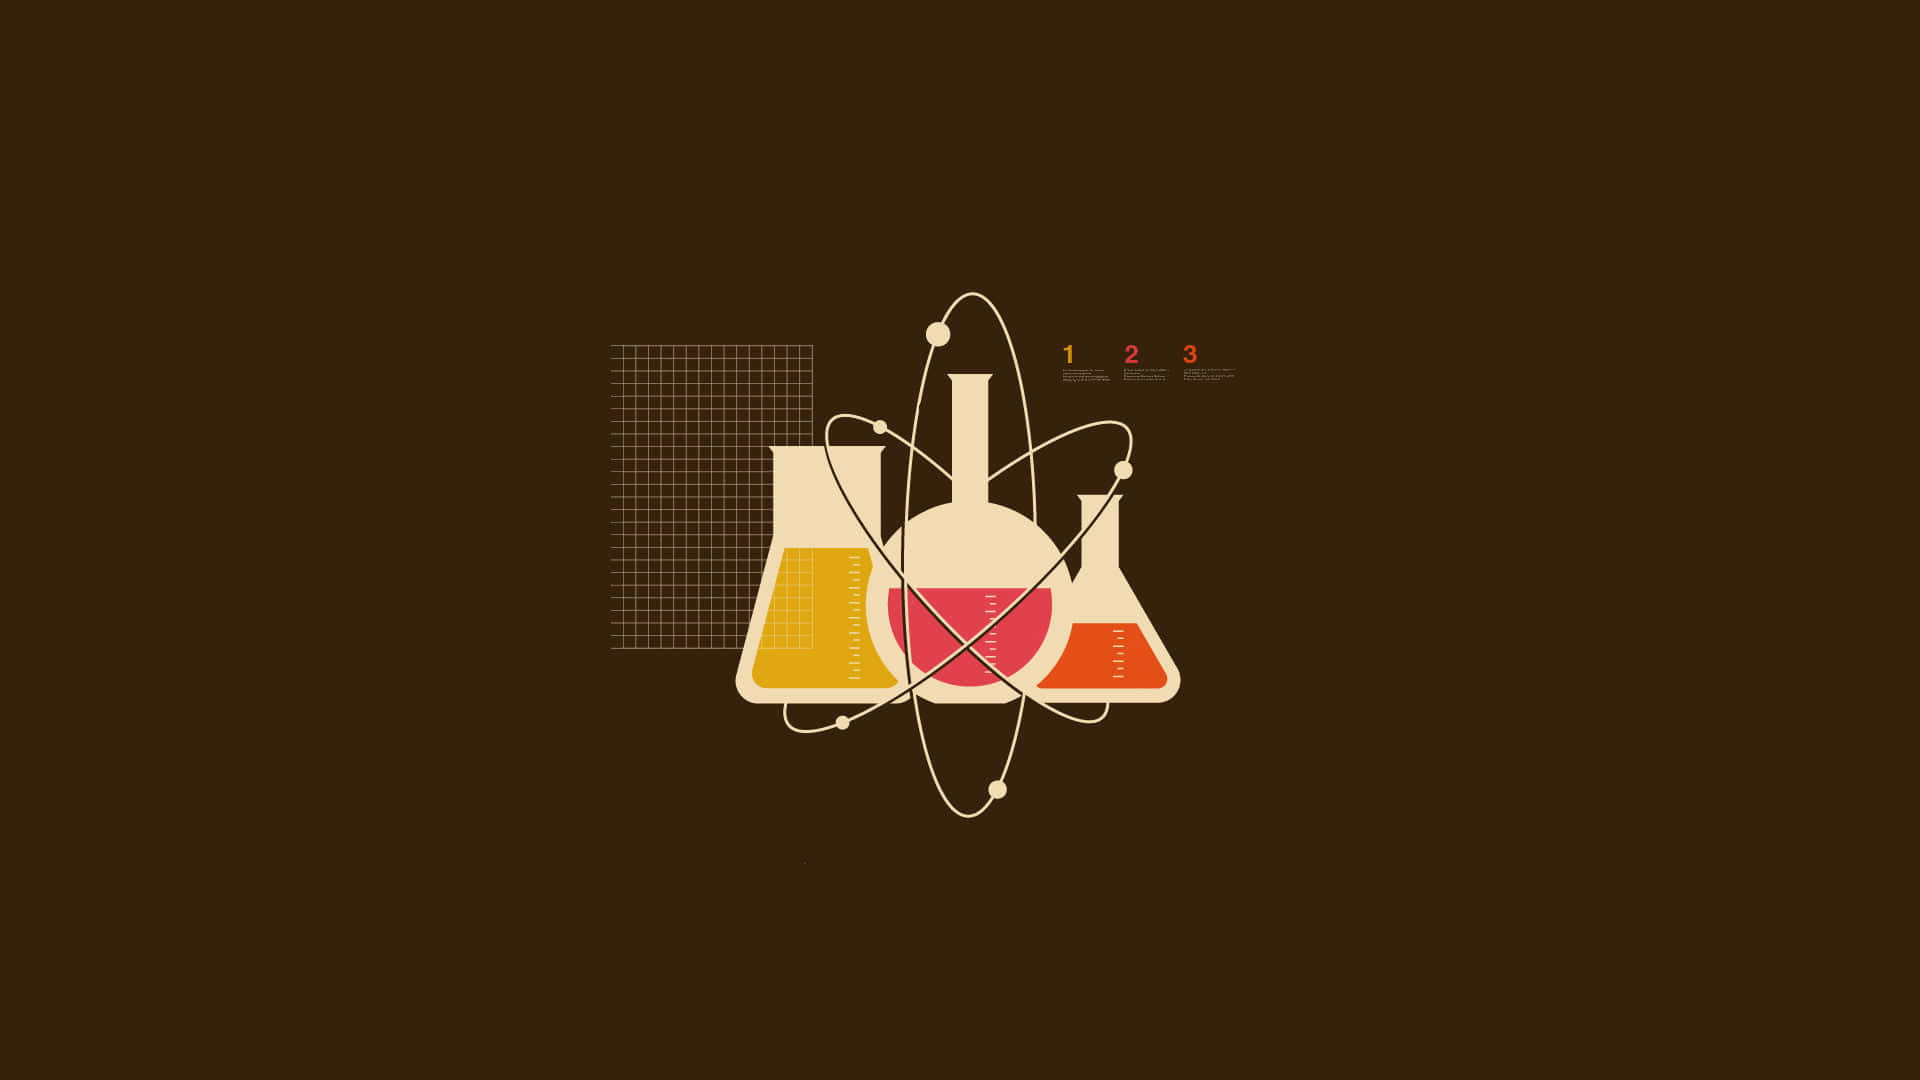 Abstract Science Aesthetic Wallpaper Wallpaper